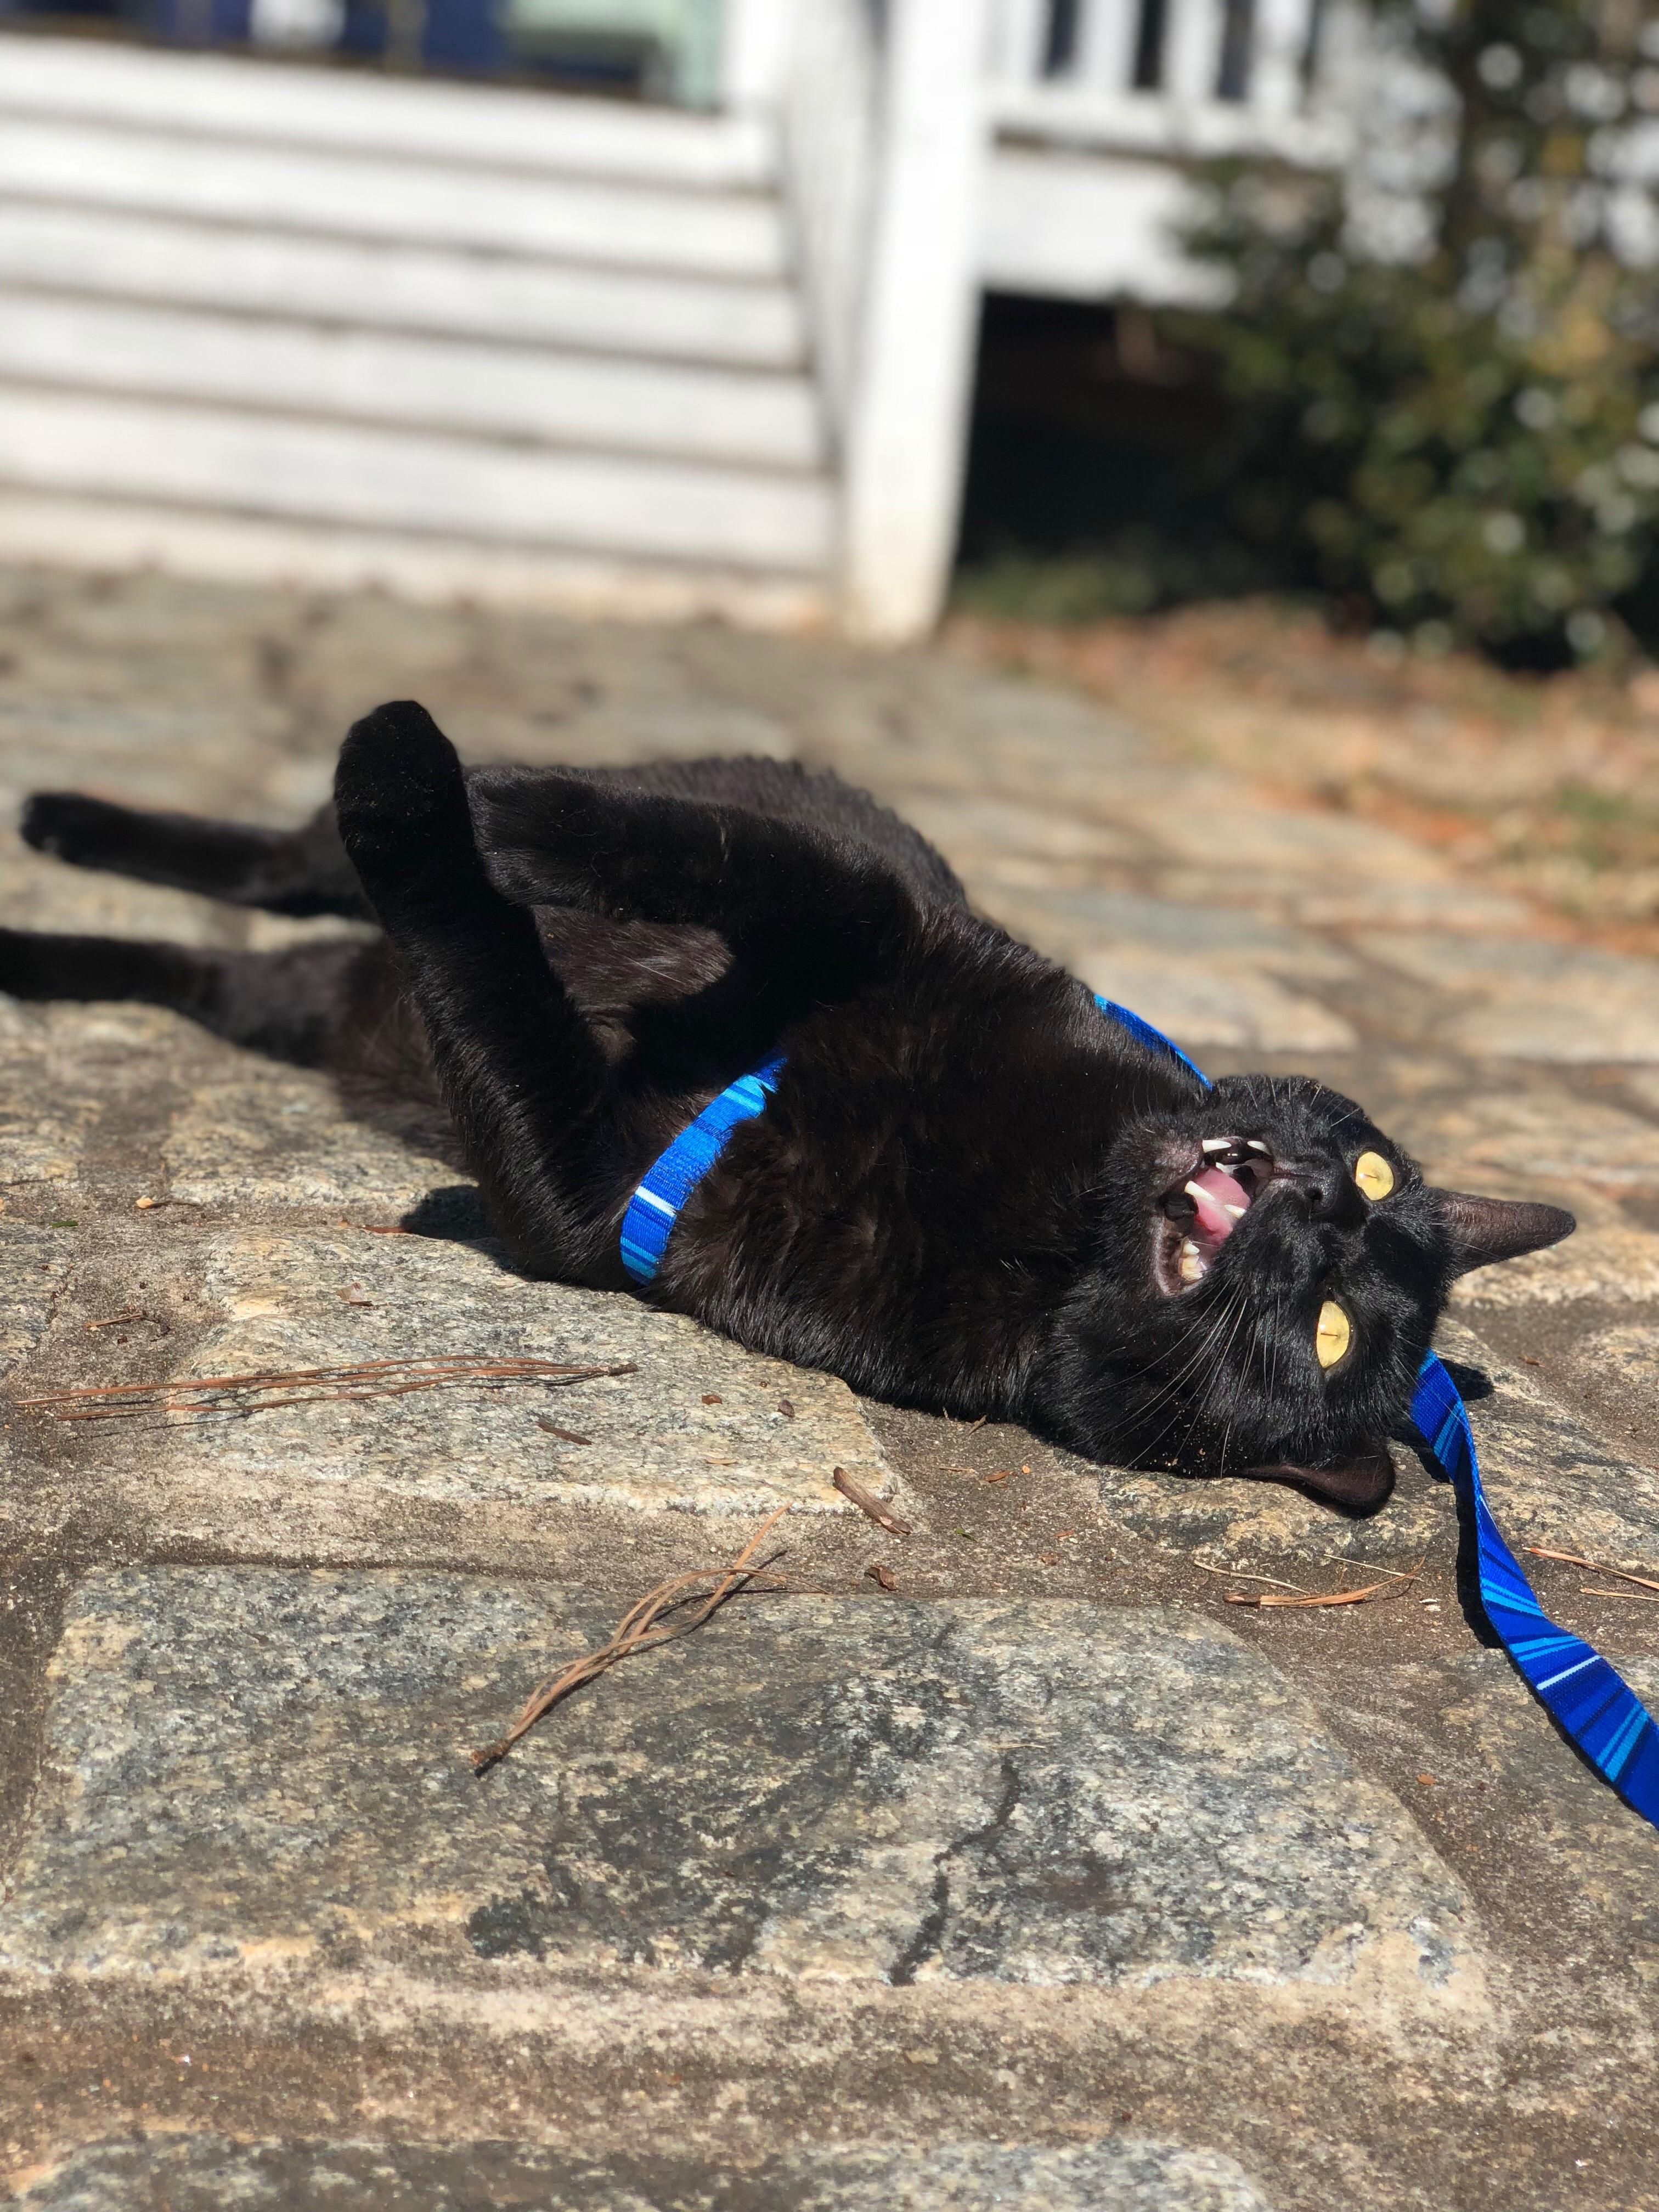 Our cat went outside for the first time today